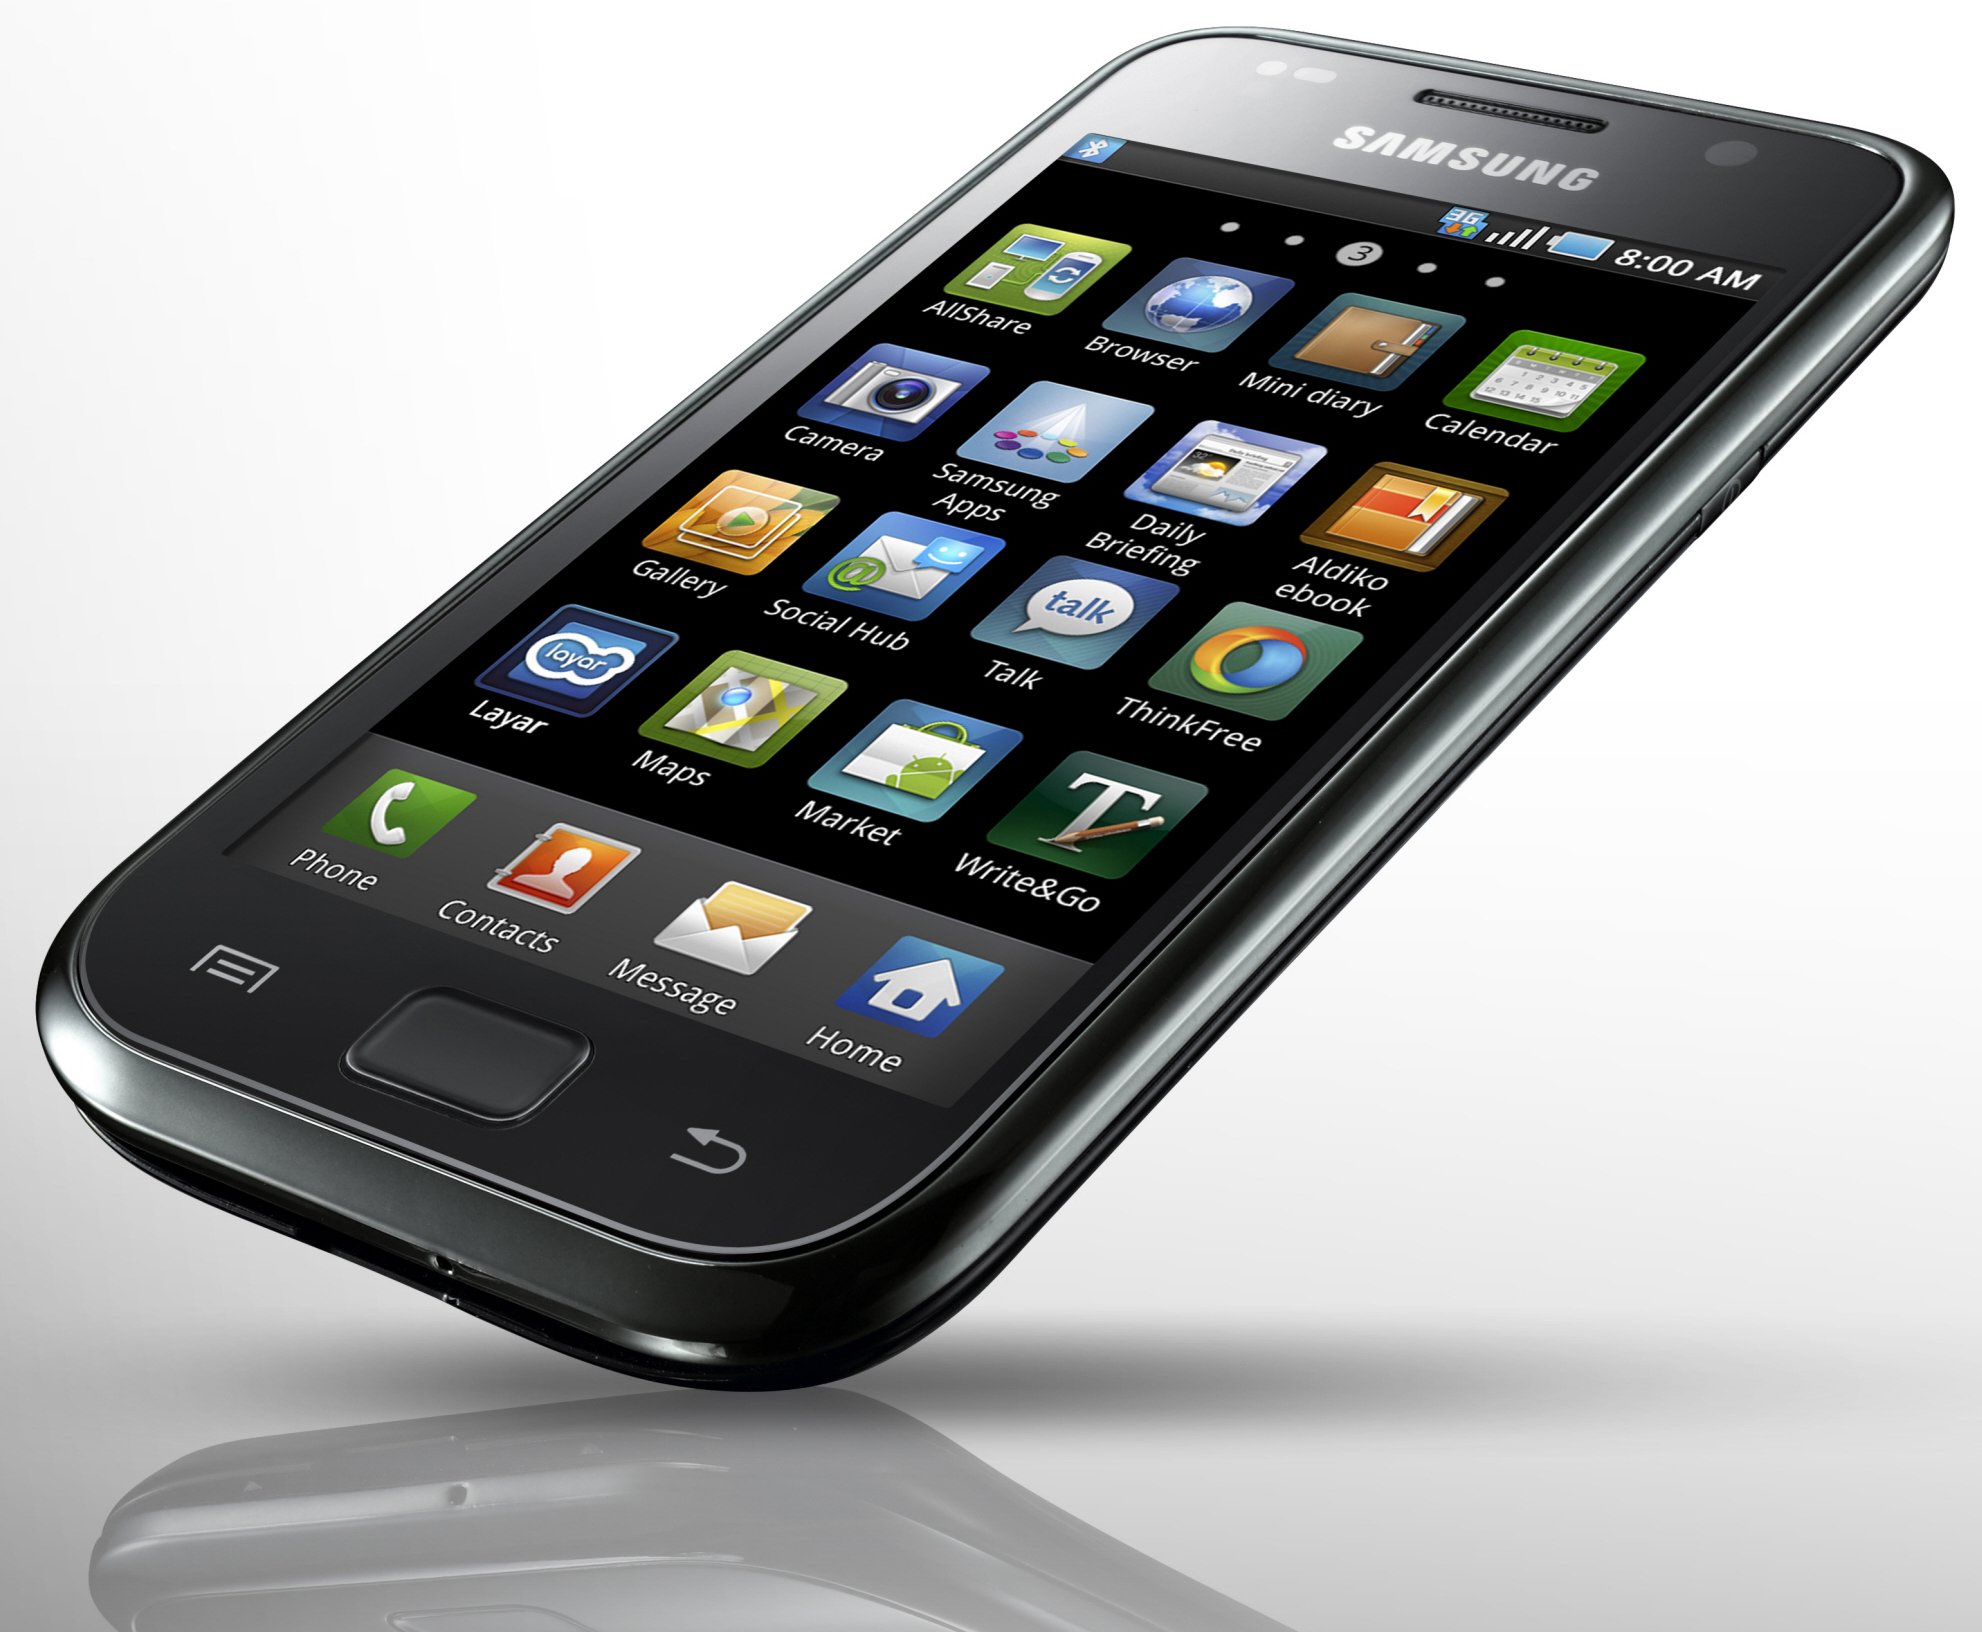 Samsung I9000 Galaxy S specs, review, release date - PhonesData